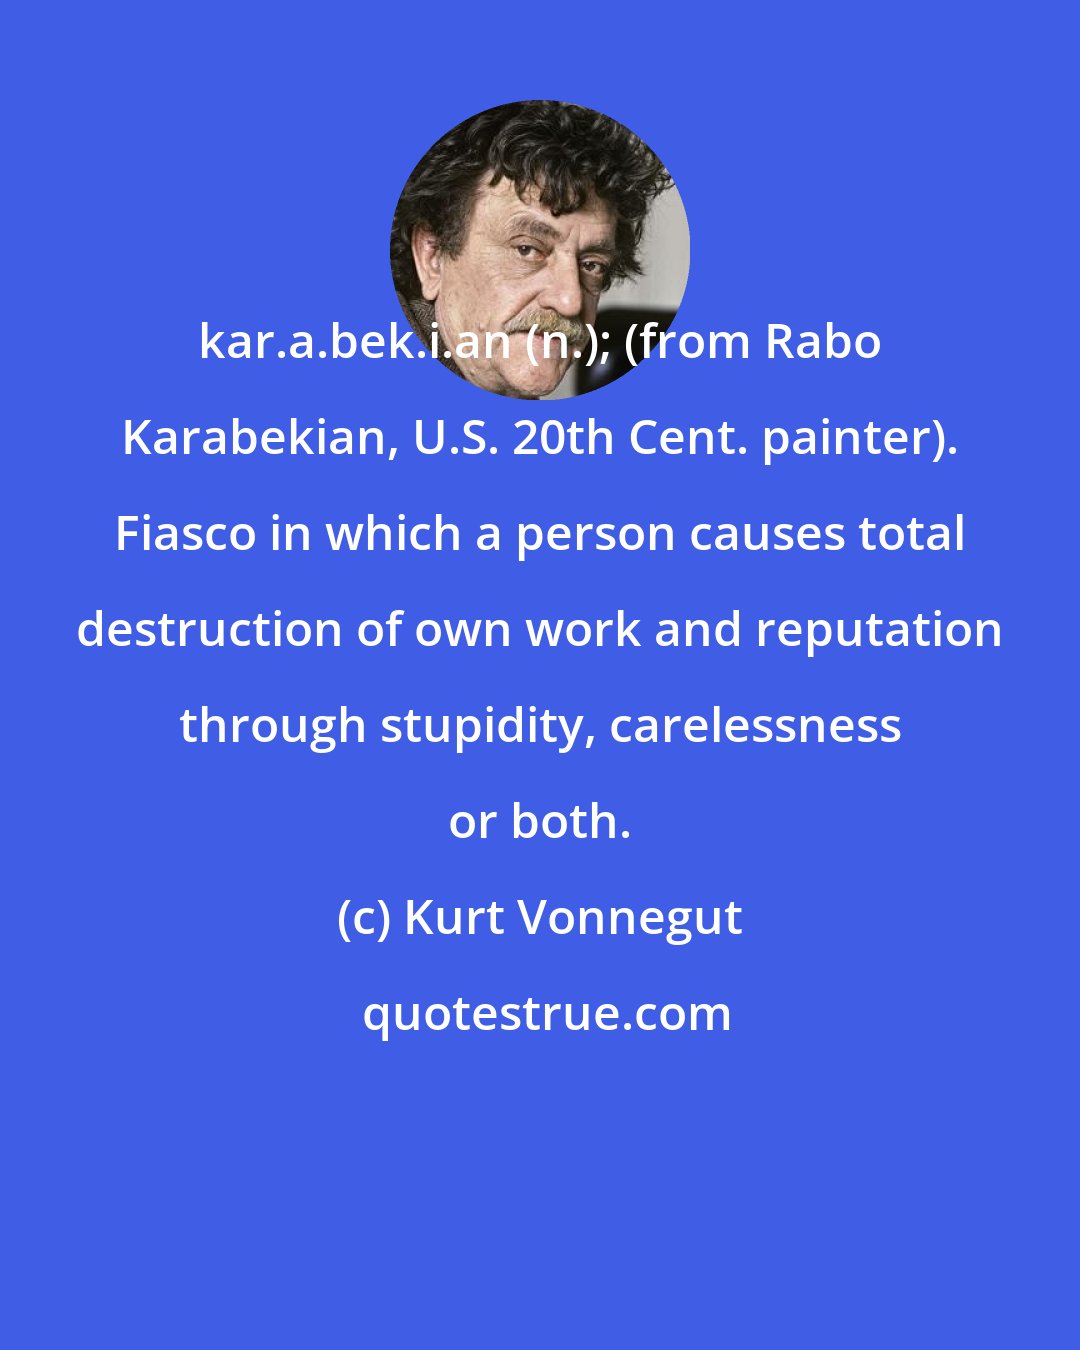 Kurt Vonnegut: kar.a.bek.i.an (n.); (from Rabo Karabekian, U.S. 20th Cent. painter). Fiasco in which a person causes total destruction of own work and reputation through stupidity, carelessness or both.